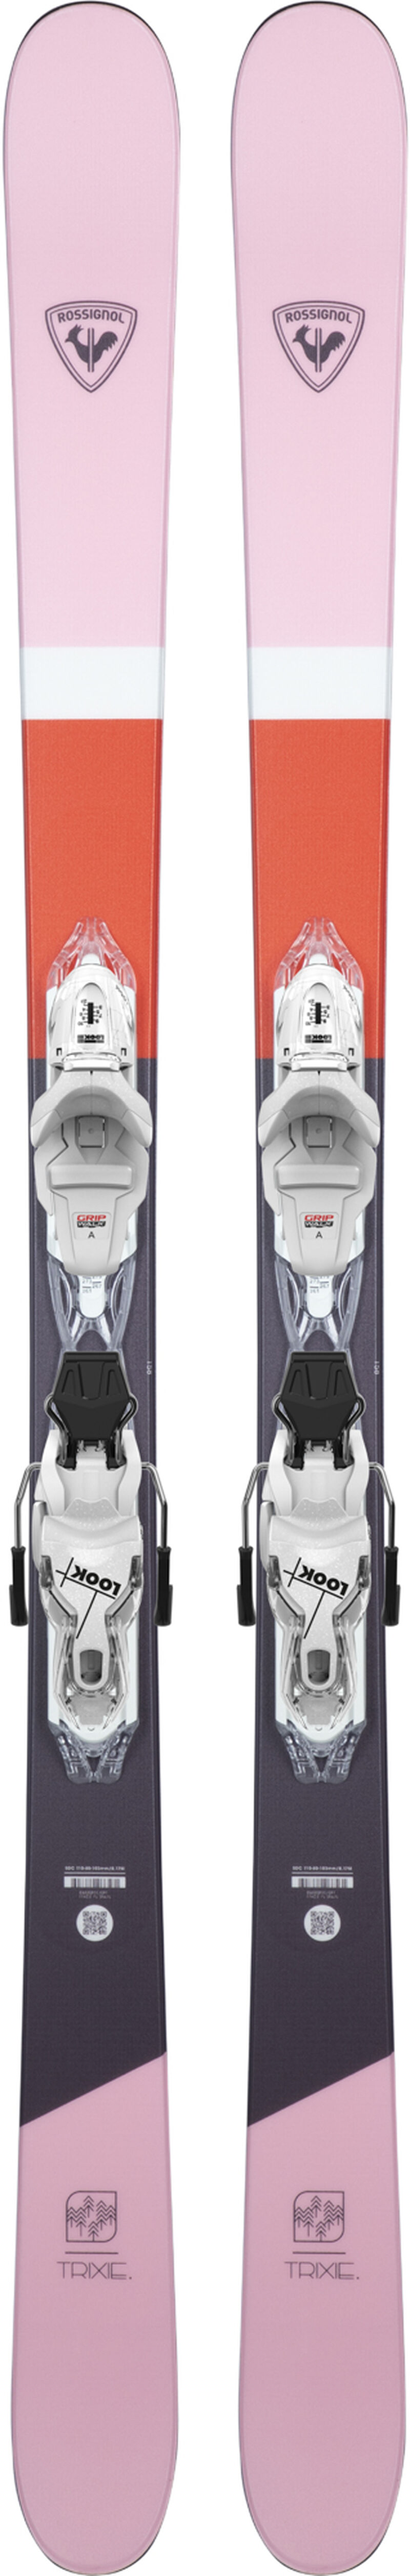 Rossignol Skis Freestyle femme Trixie (Xpress) 